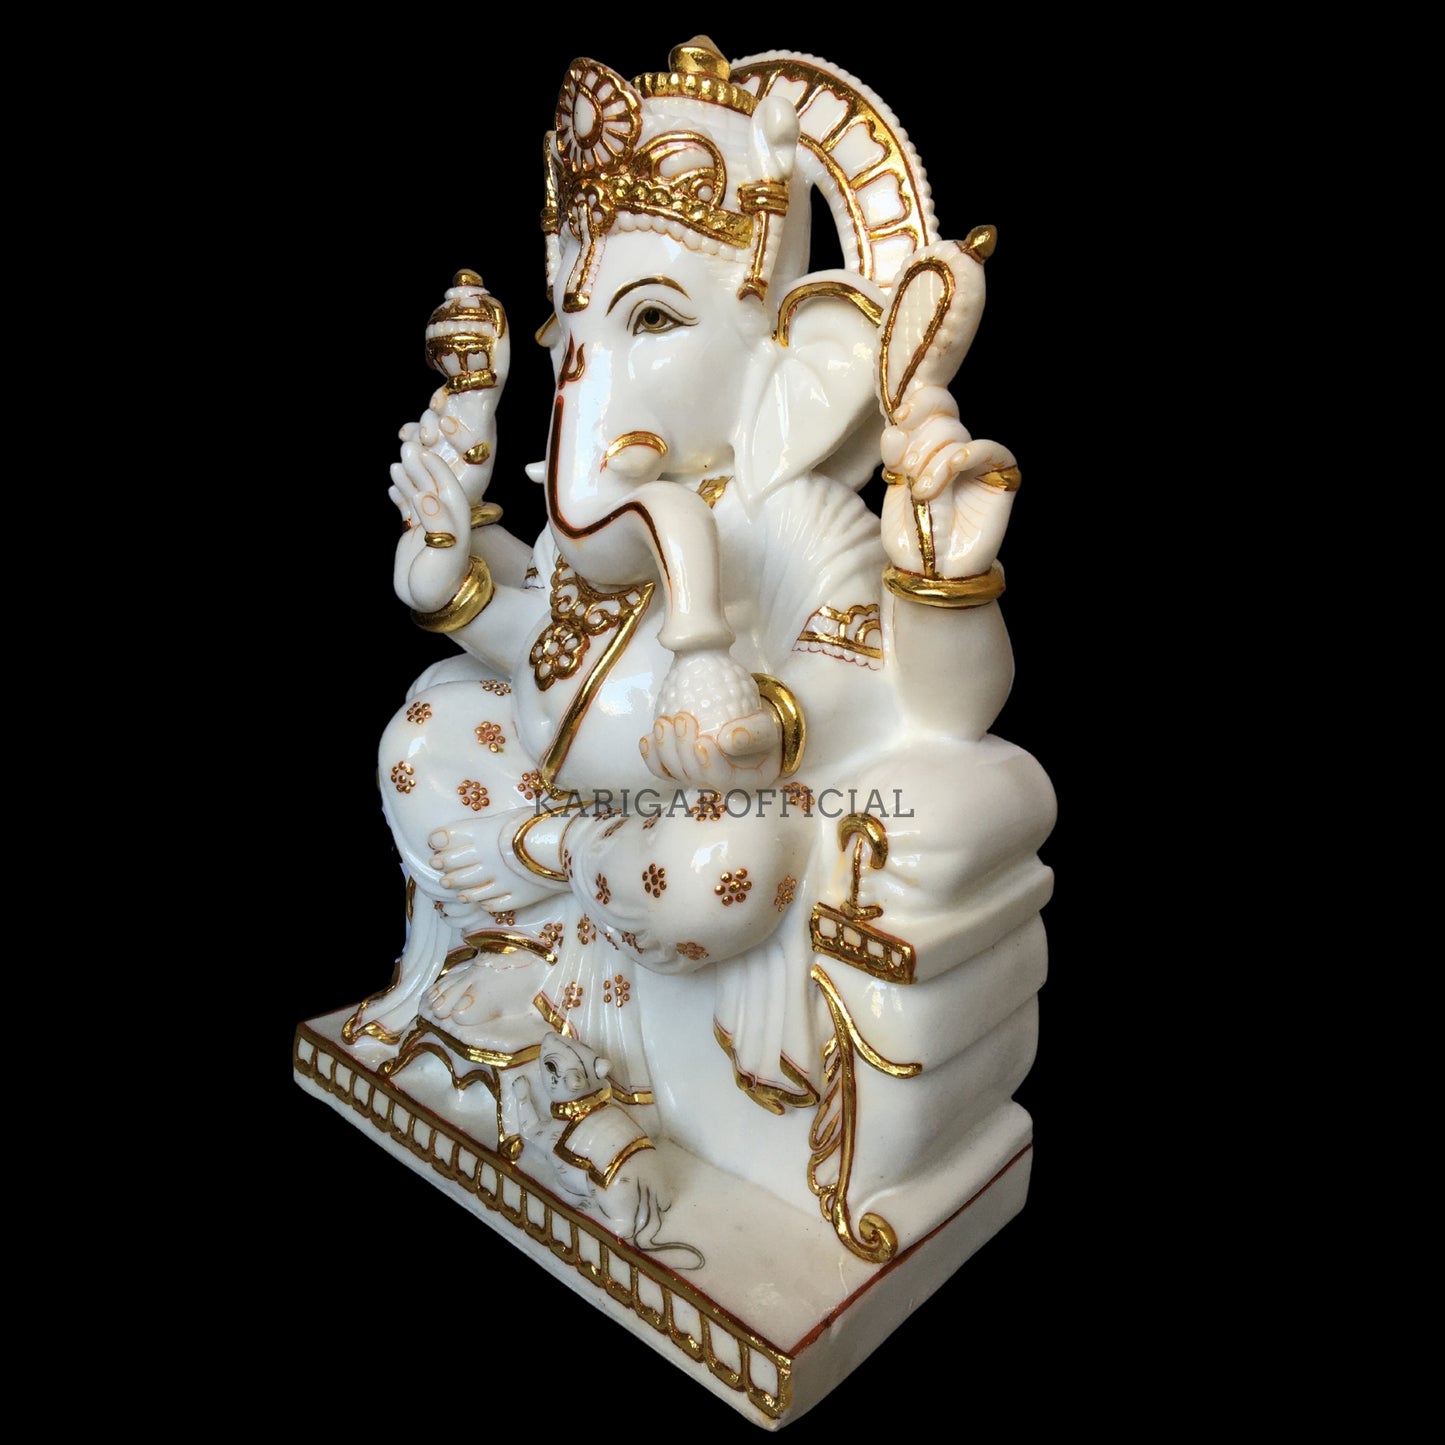 Golden Ganesha Statue Large 24 inches Marble Ganapati Idol For Home Temple Housewarming Gifts